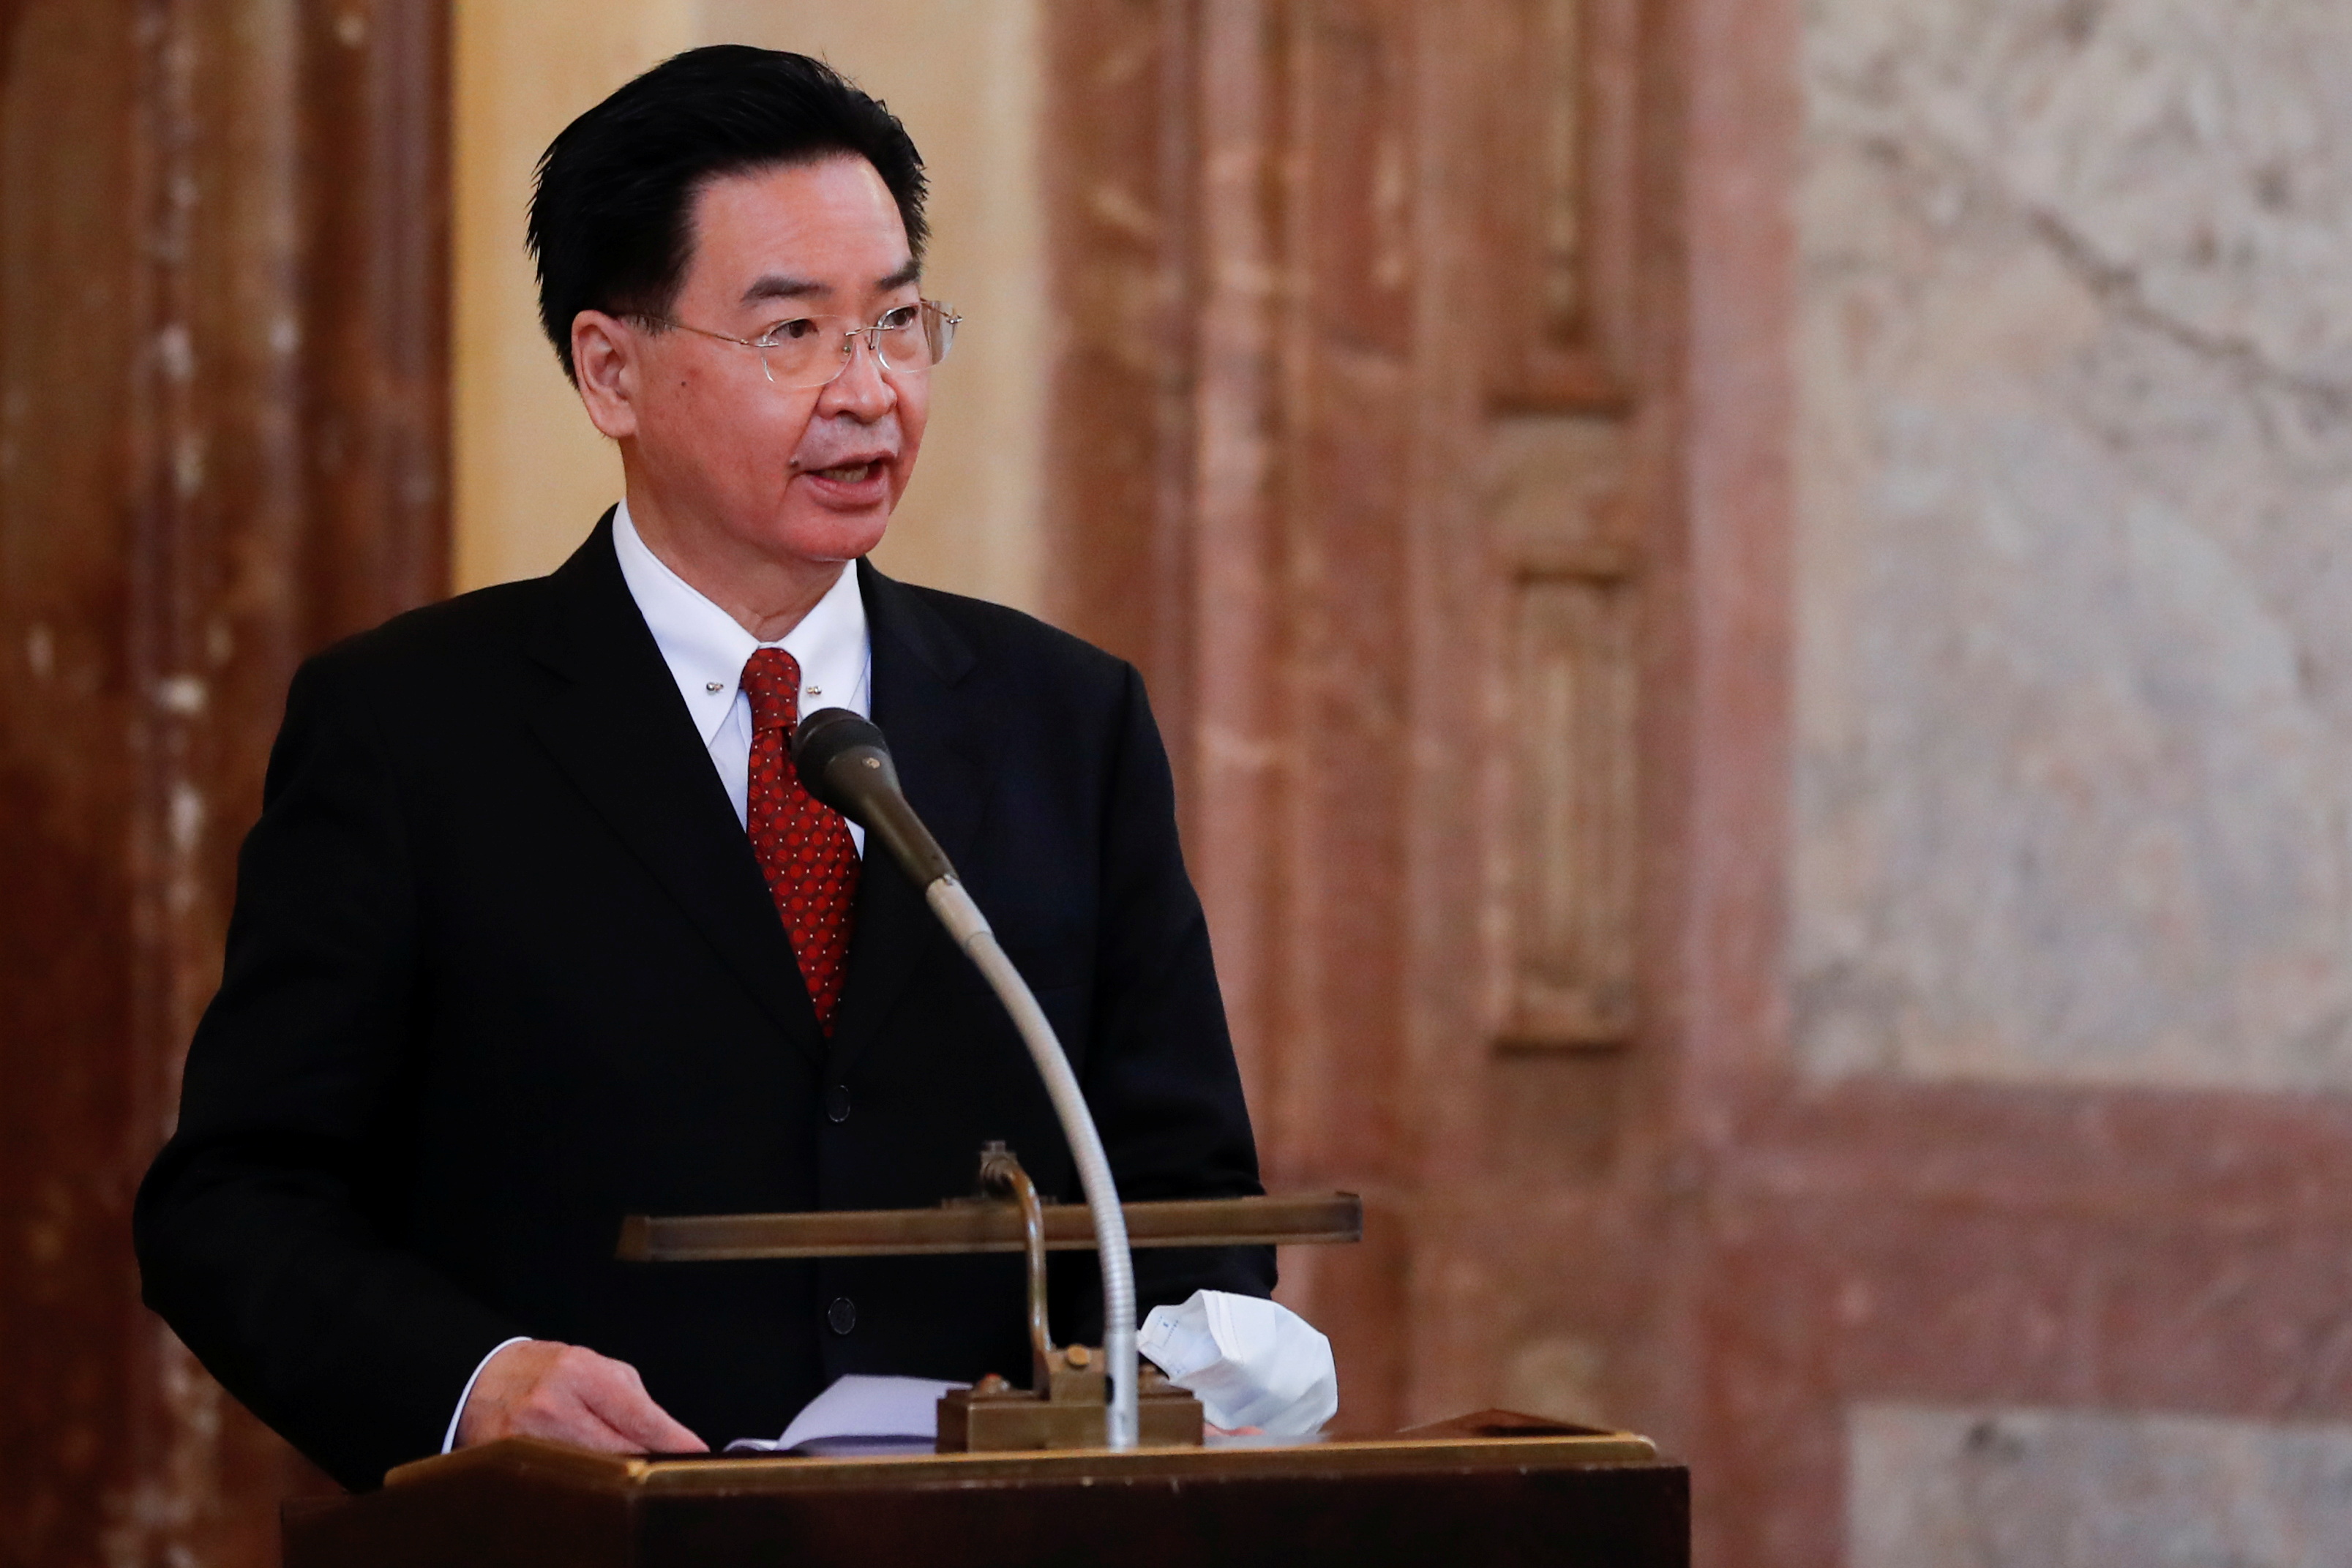 Taiwan Foreign Minister Joseph Wu speaks after receiving the Silver Commemorative Medal of the Senate of the Parliament of the Czech Republic, in Prague